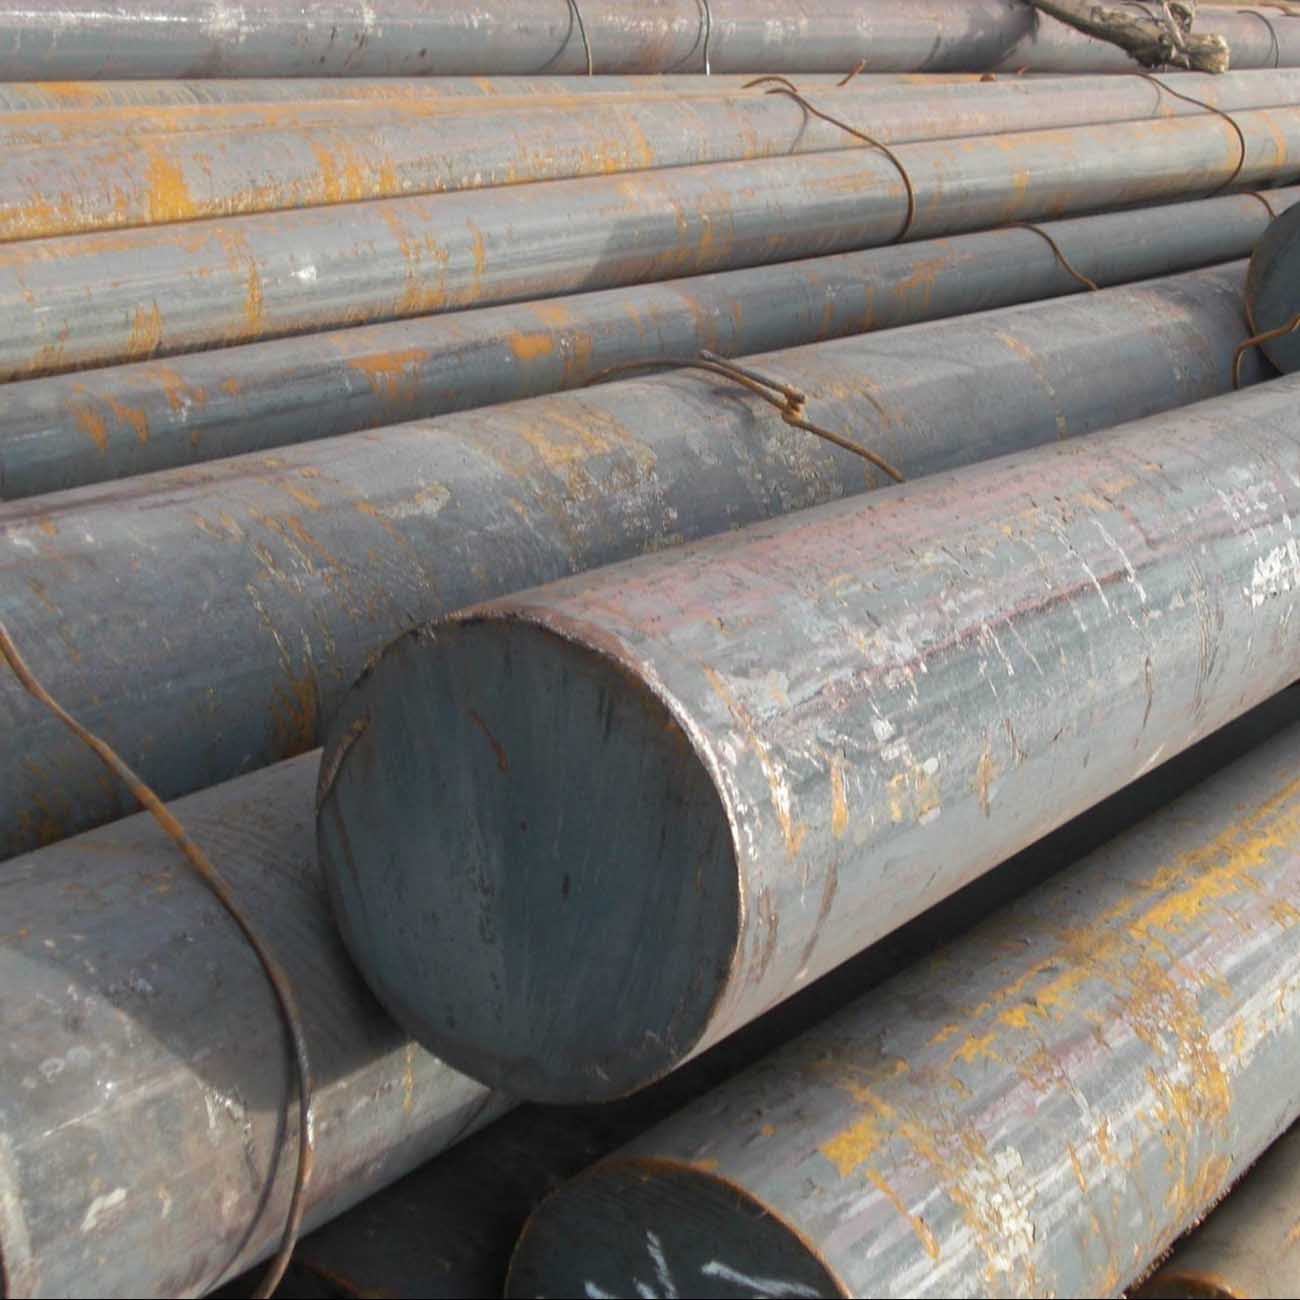  709M40 Alloy Steel Round Bars Manufacturers, Suppliers, Importers, Dealers in Mumbai India